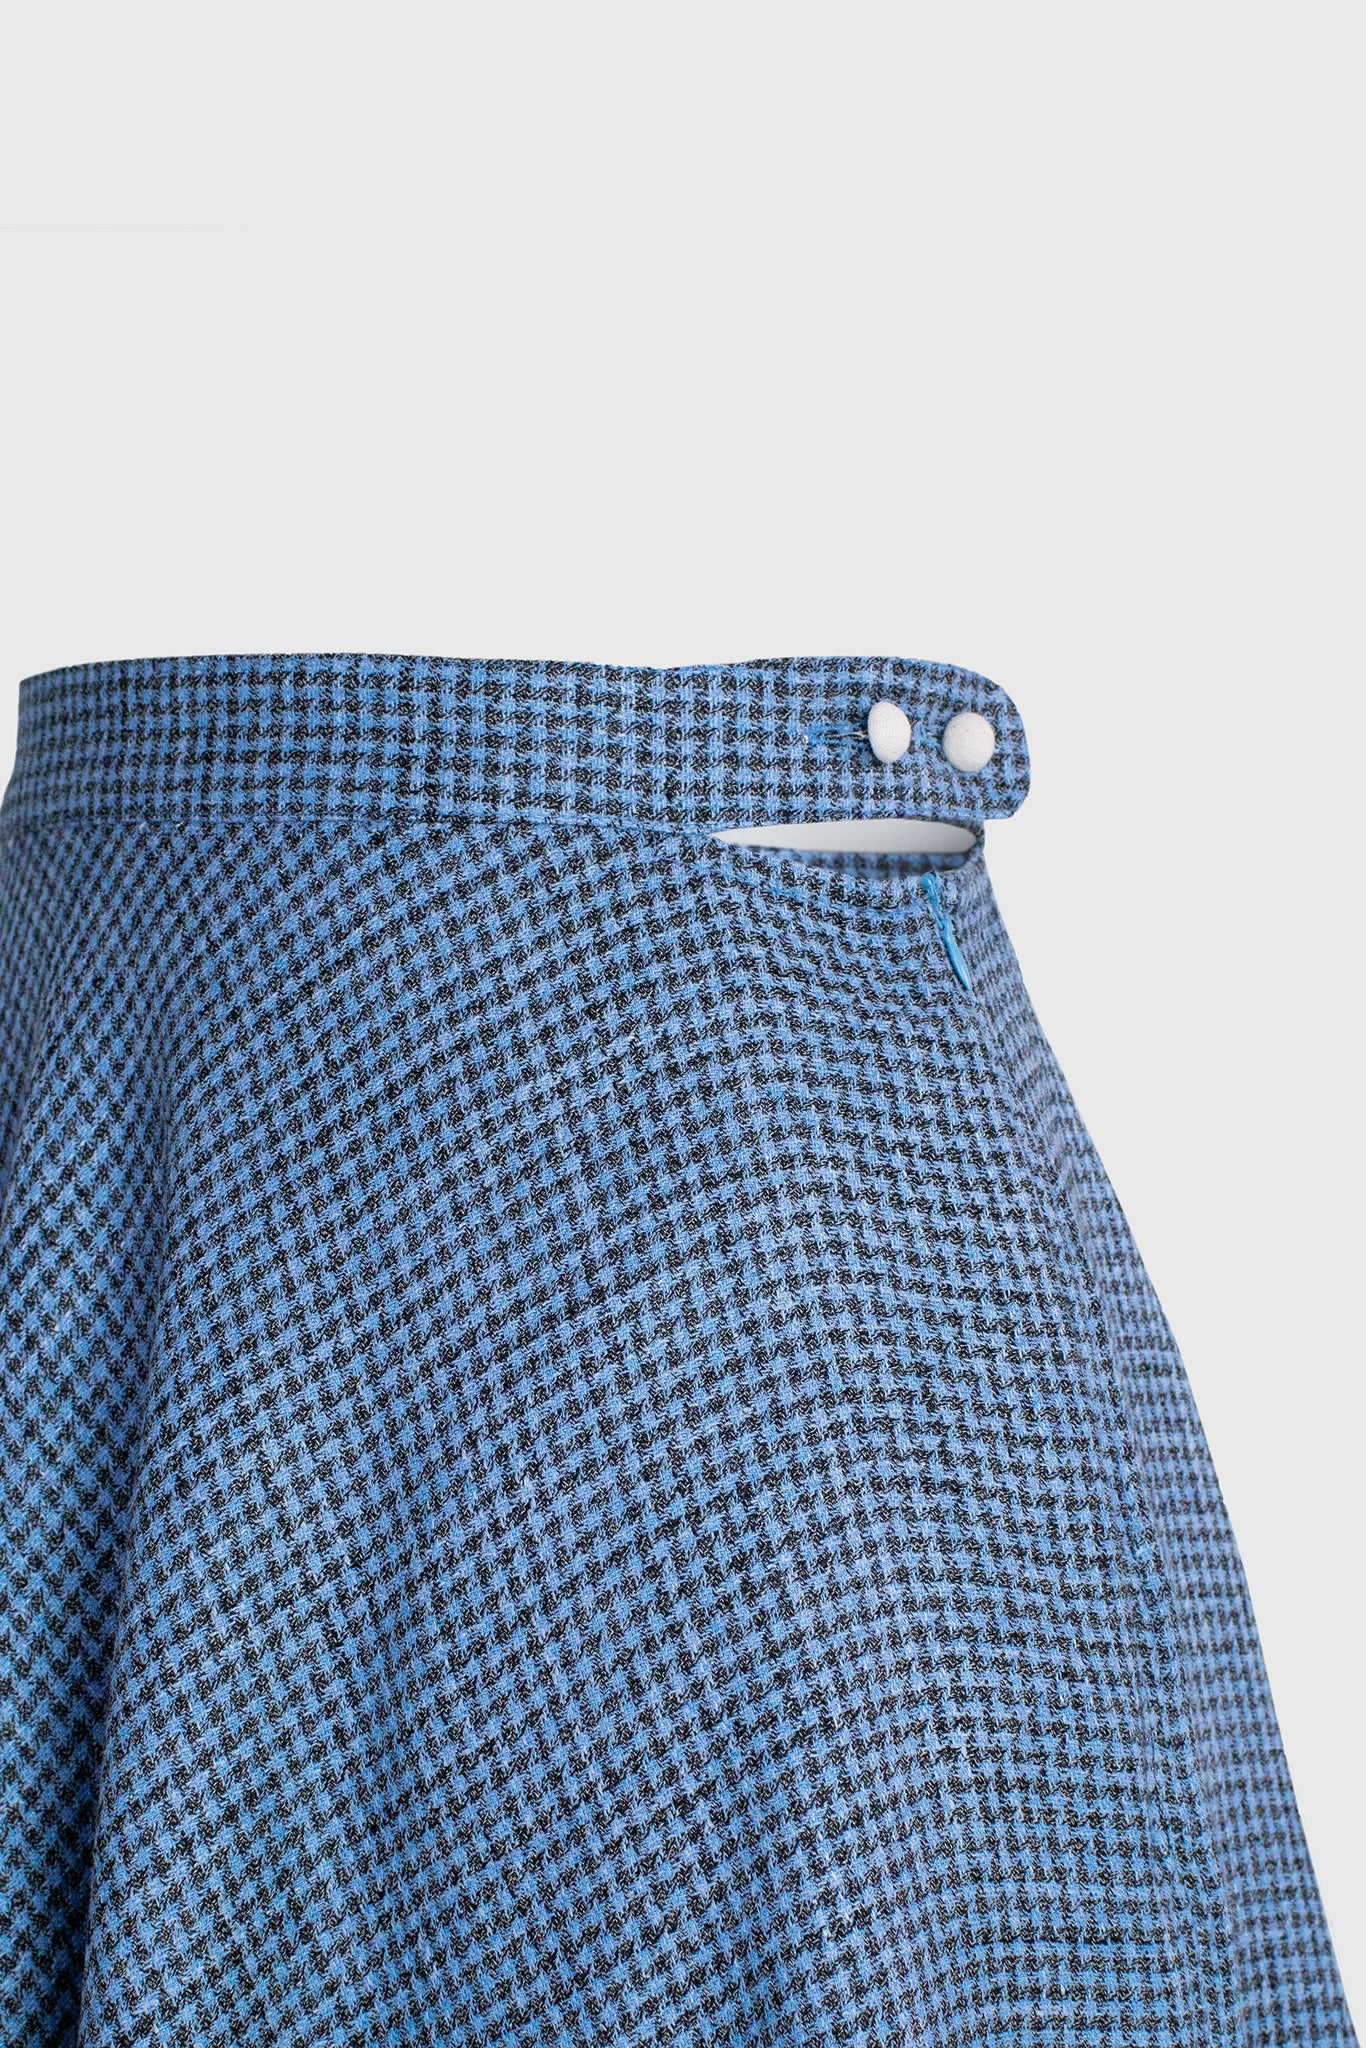 skirt detail, waistband for a better fit, cutout on the side revealing the waist, button up and zipper side closure, two covered buttons, highly bespoke houndstooth Italian textile, luxury super merinos silk and linen